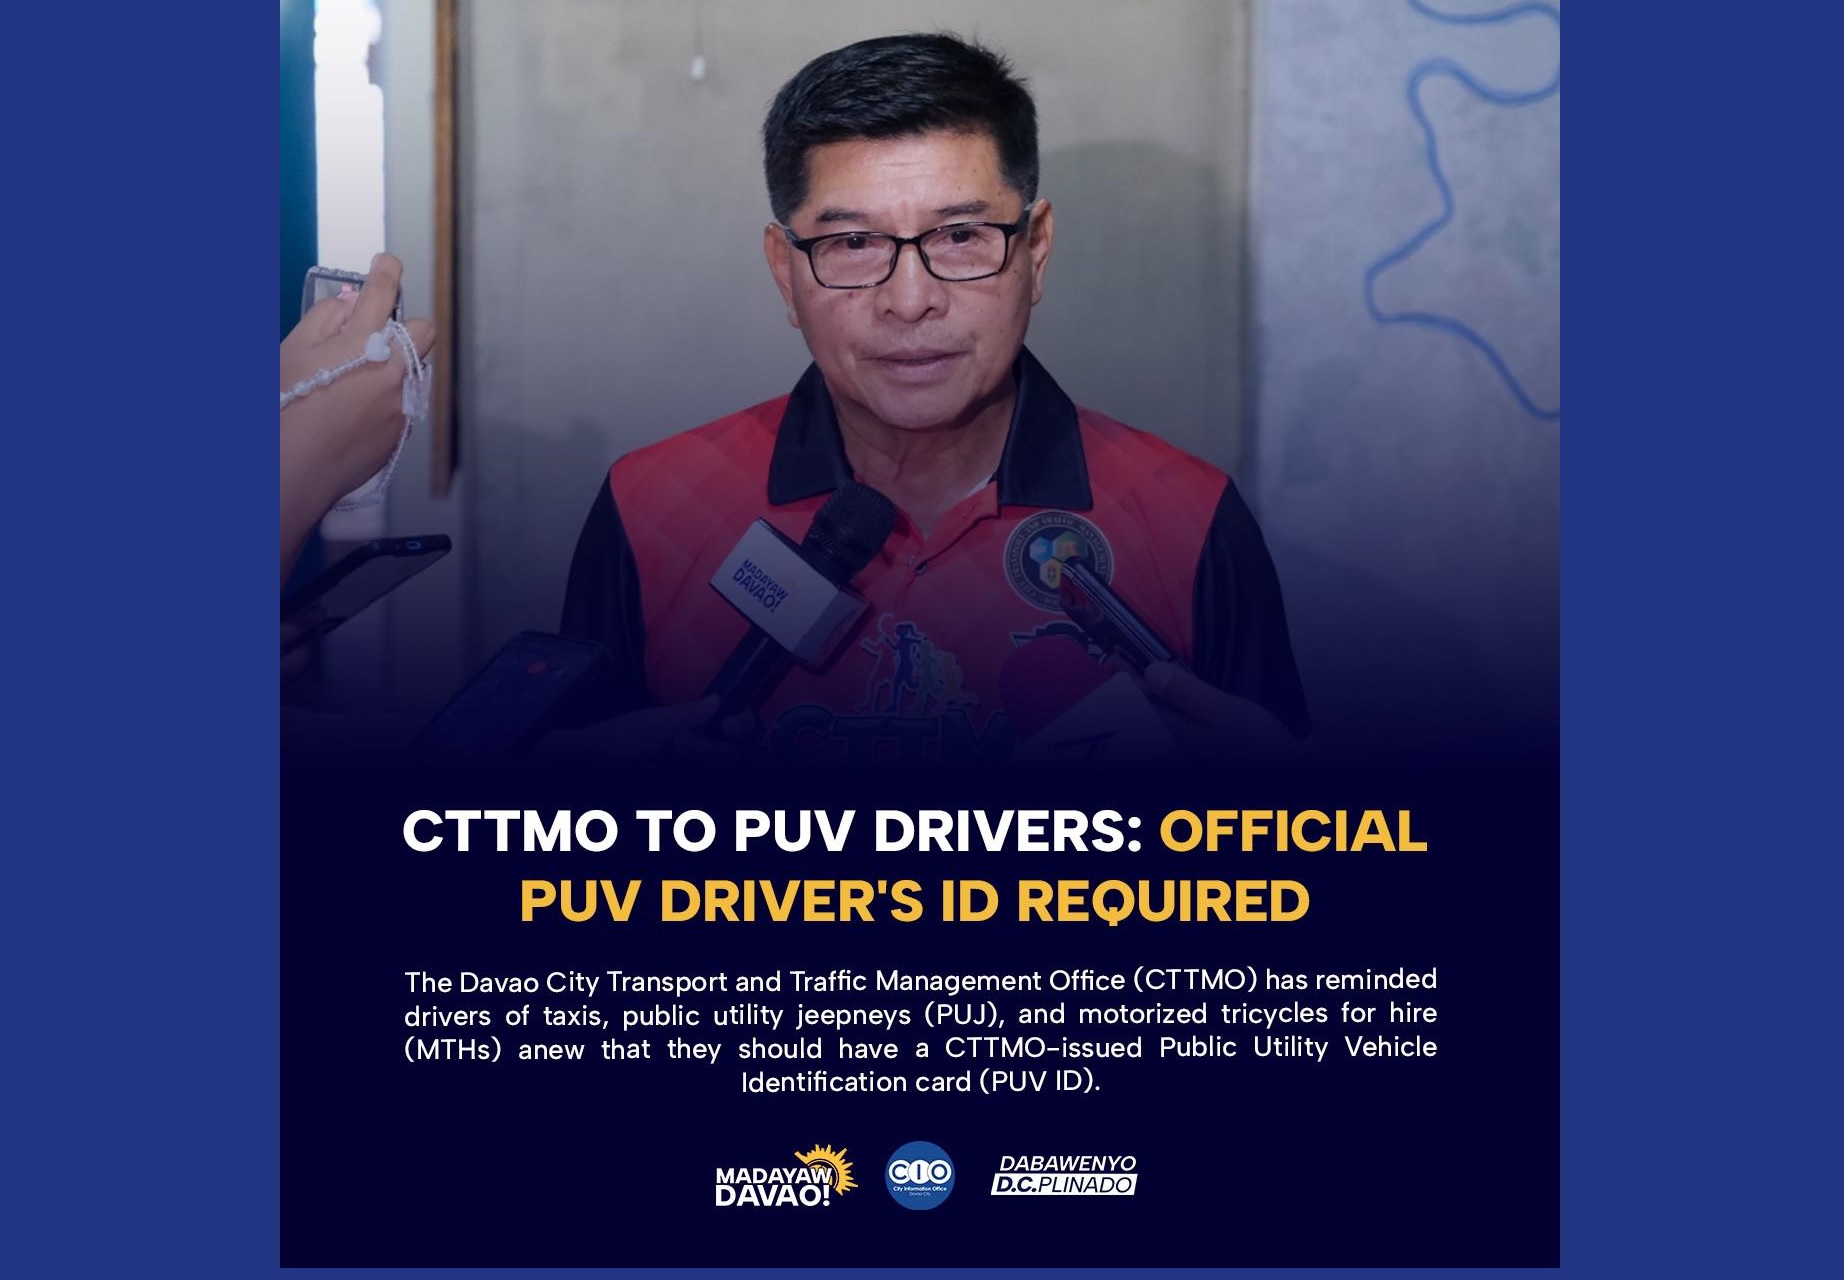 CTTMO TO PUV DRIVERS: OFFICIAL PUV DRIVER’S ID REQUIRED